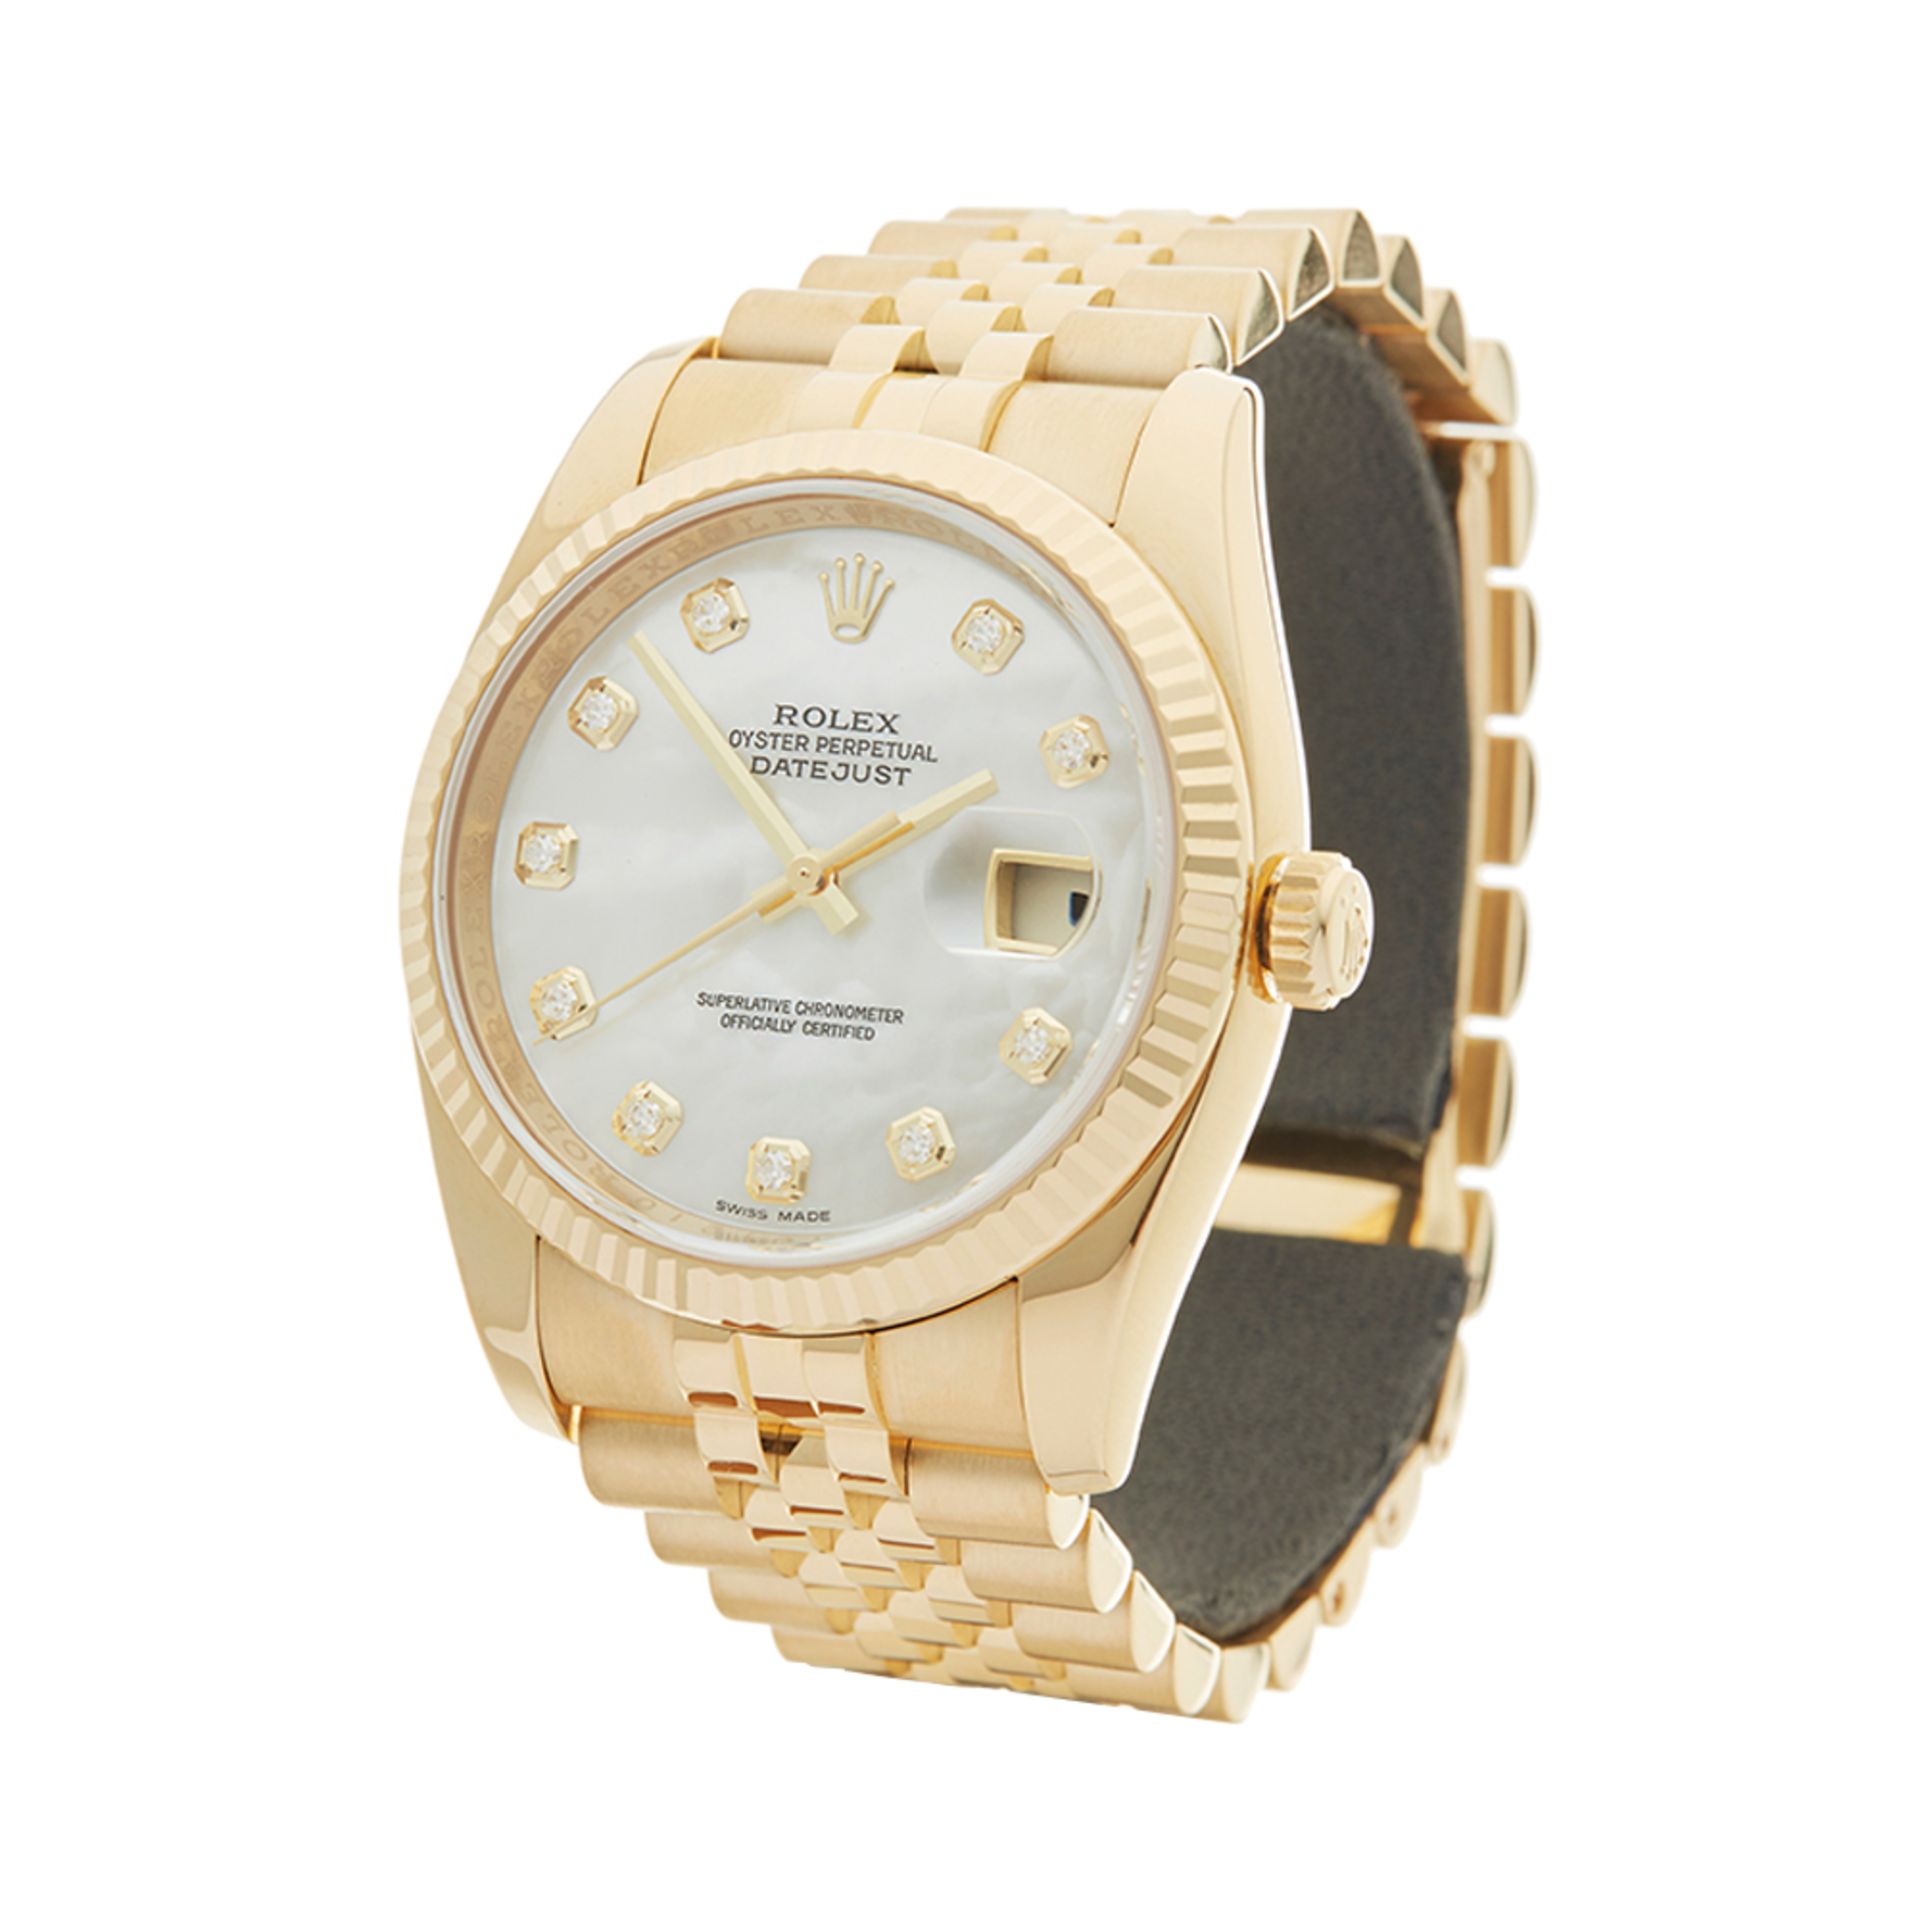 Datejust 36mm 18K Yellow Gold - 116238 - Image 3 of 8